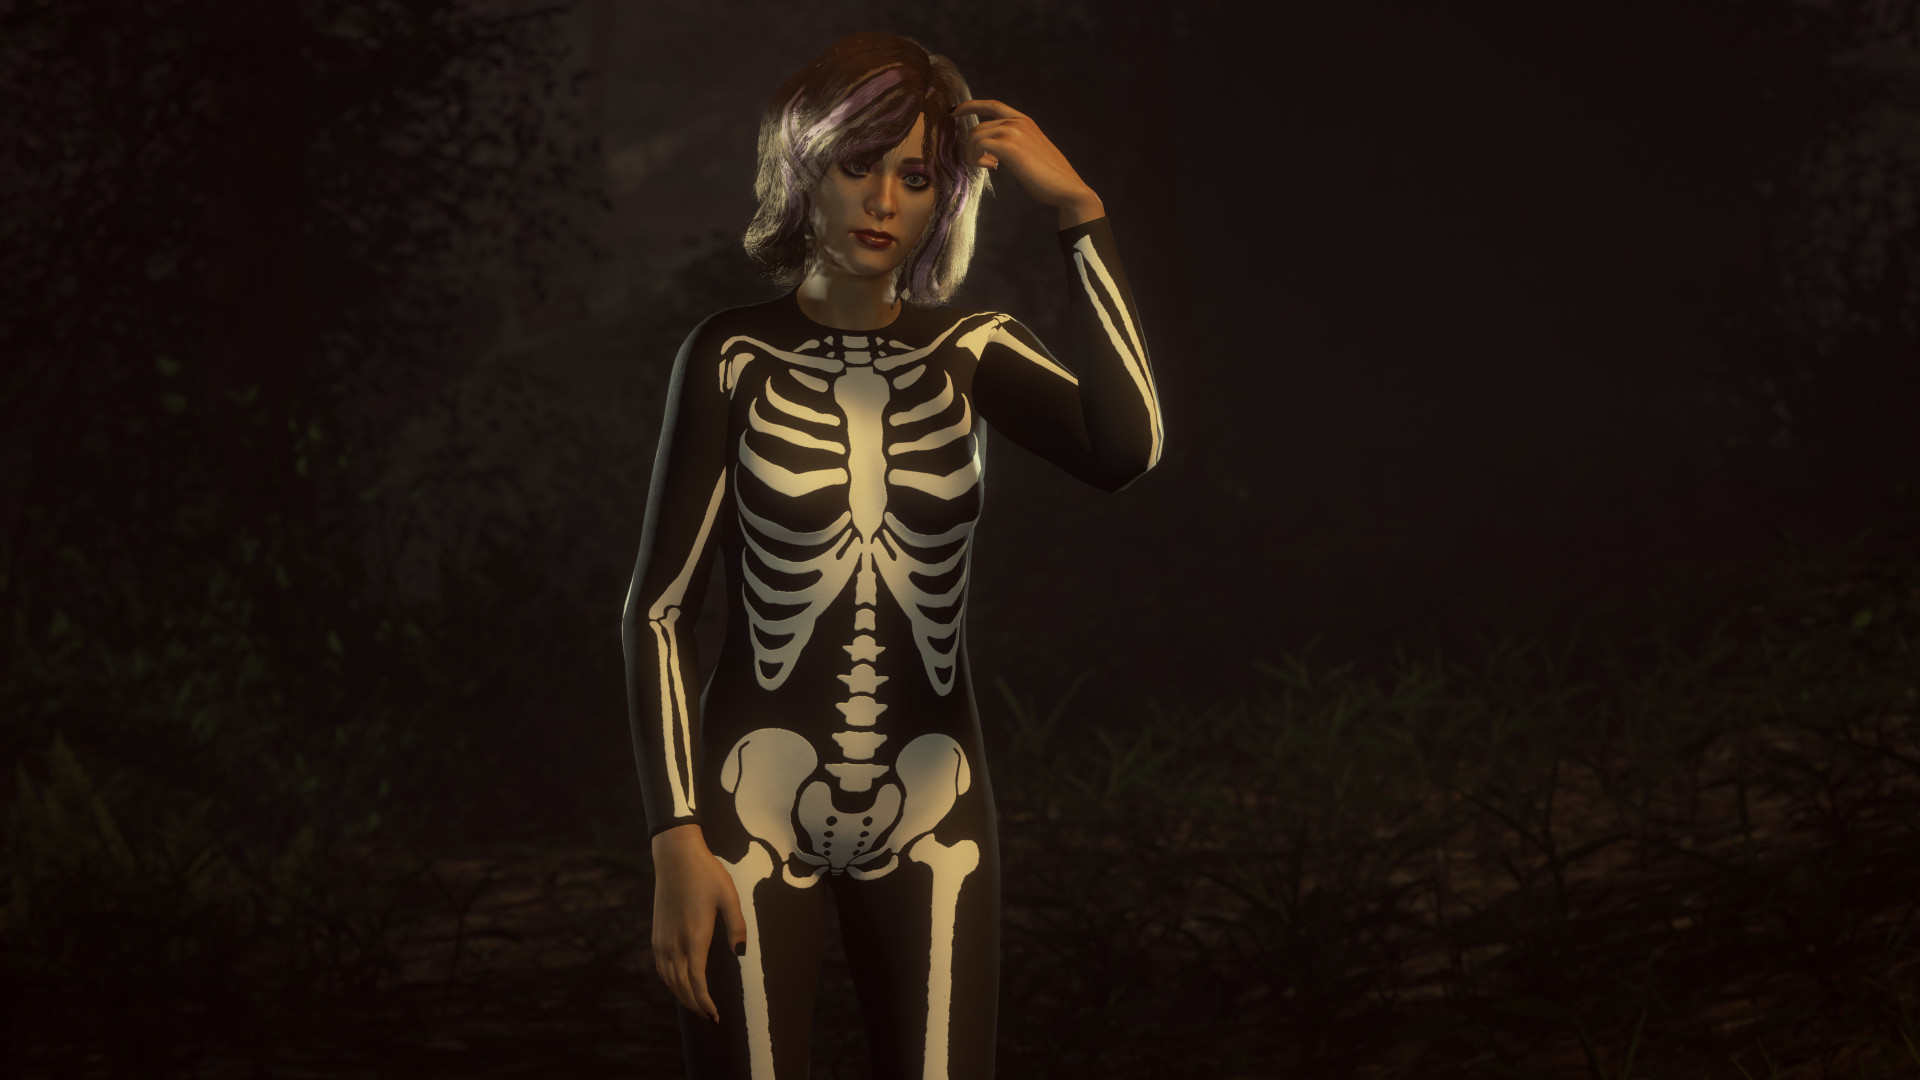 Friday the 13th: The Game' Unveils Halloween Costume DLC Pack